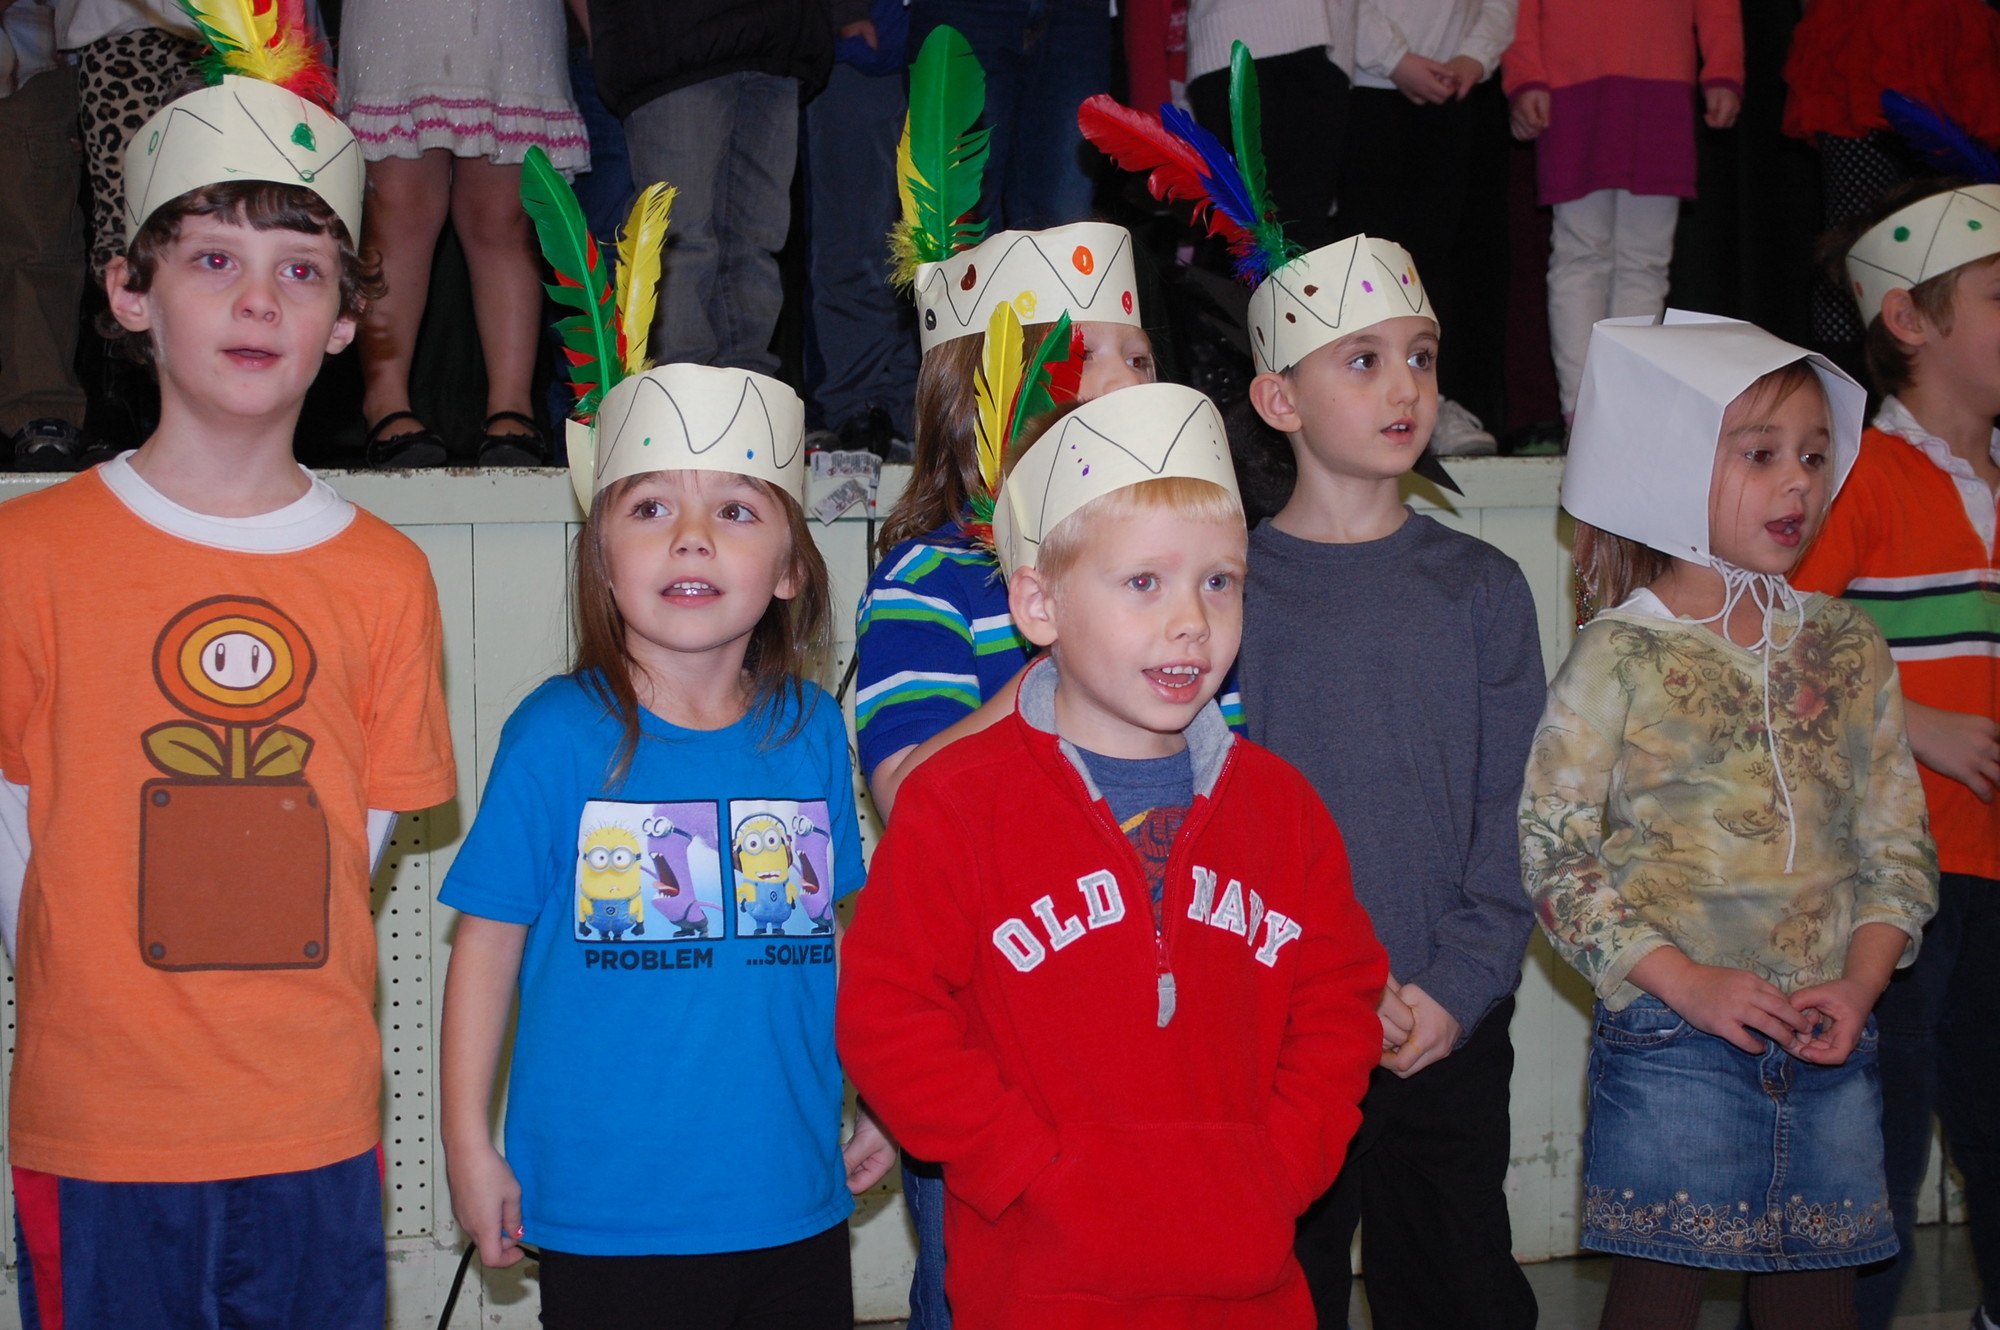 Before enjoying a feast, Lee Road School kindergarten students sang a few seasonal songs for their parents while dressed as Pilgrims and Native Americans.